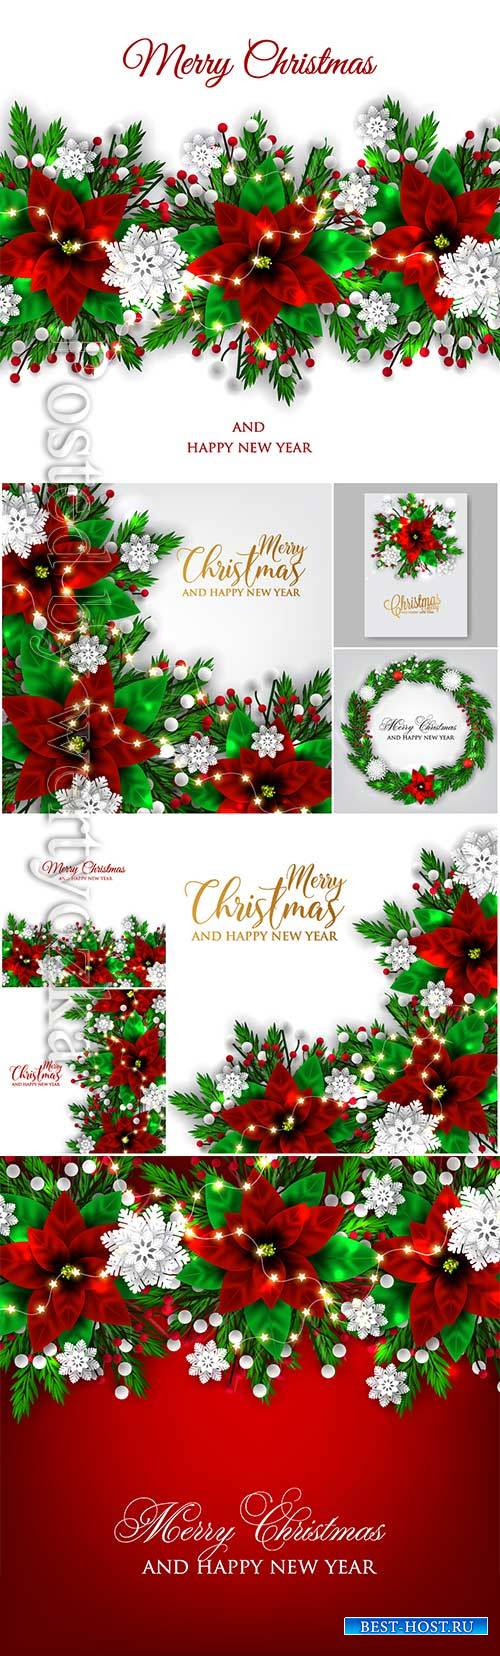 2020 Merry Chistmas and Happy New Year vector illustration # 9